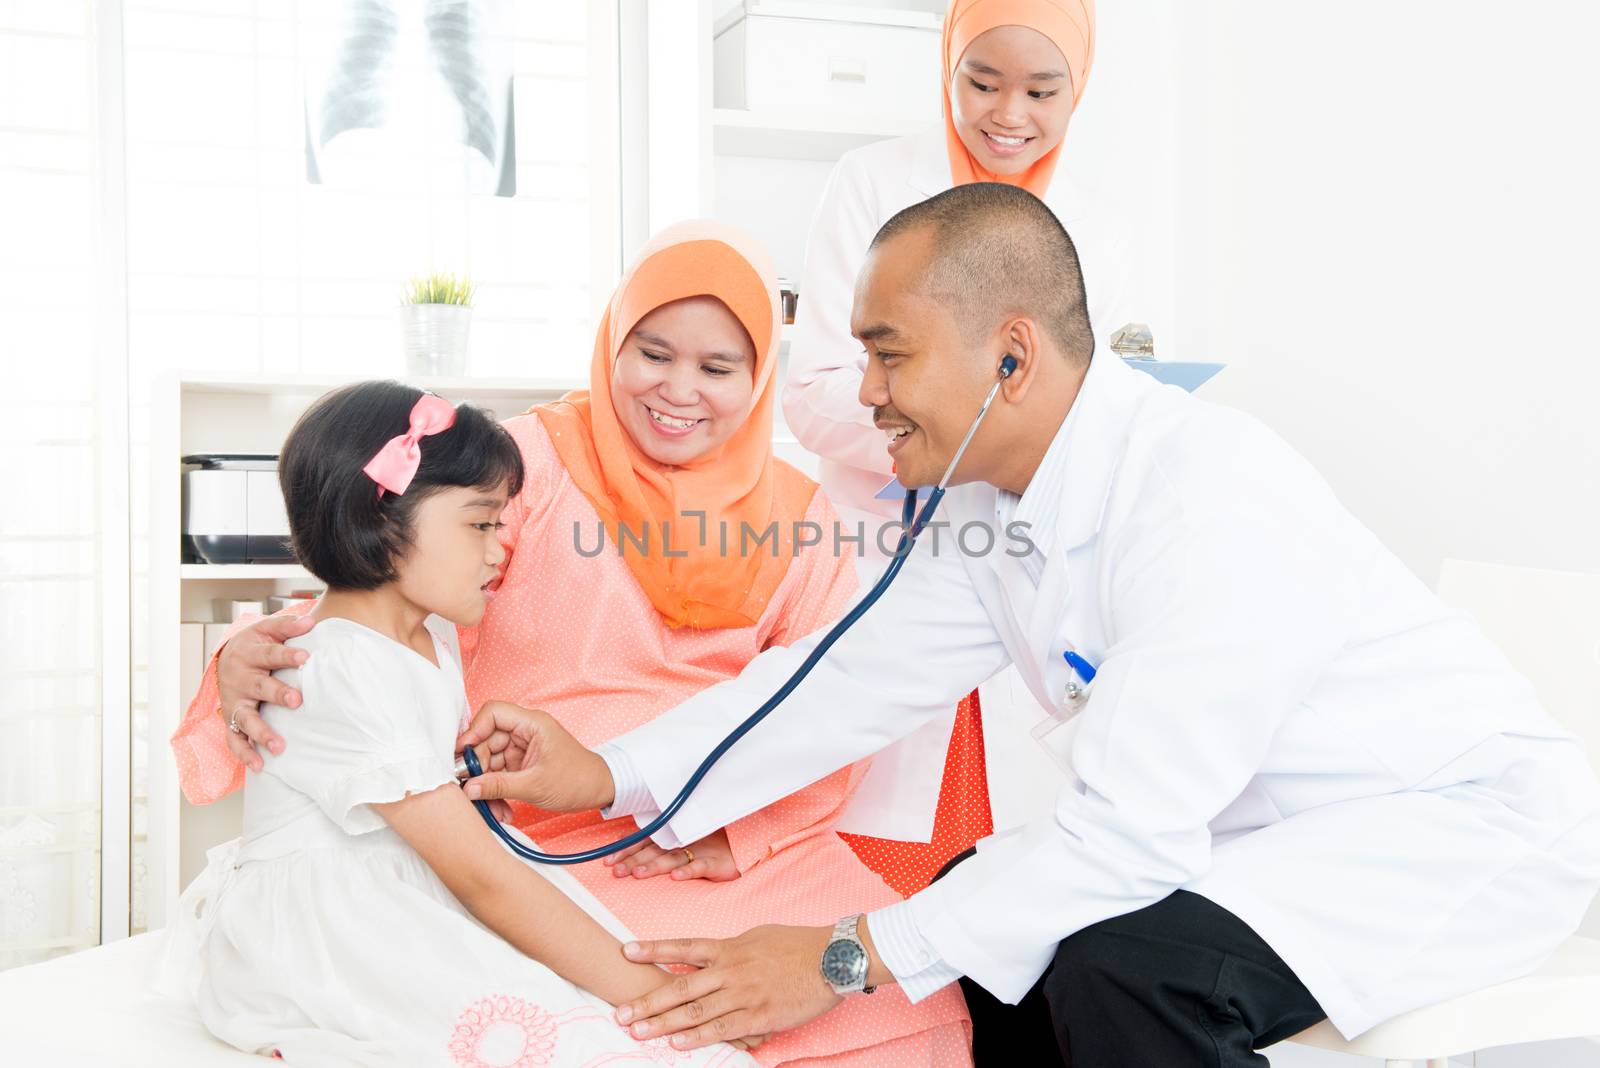 Illness Southeast Asian child patient consulting medical doctor. Muslim family. 